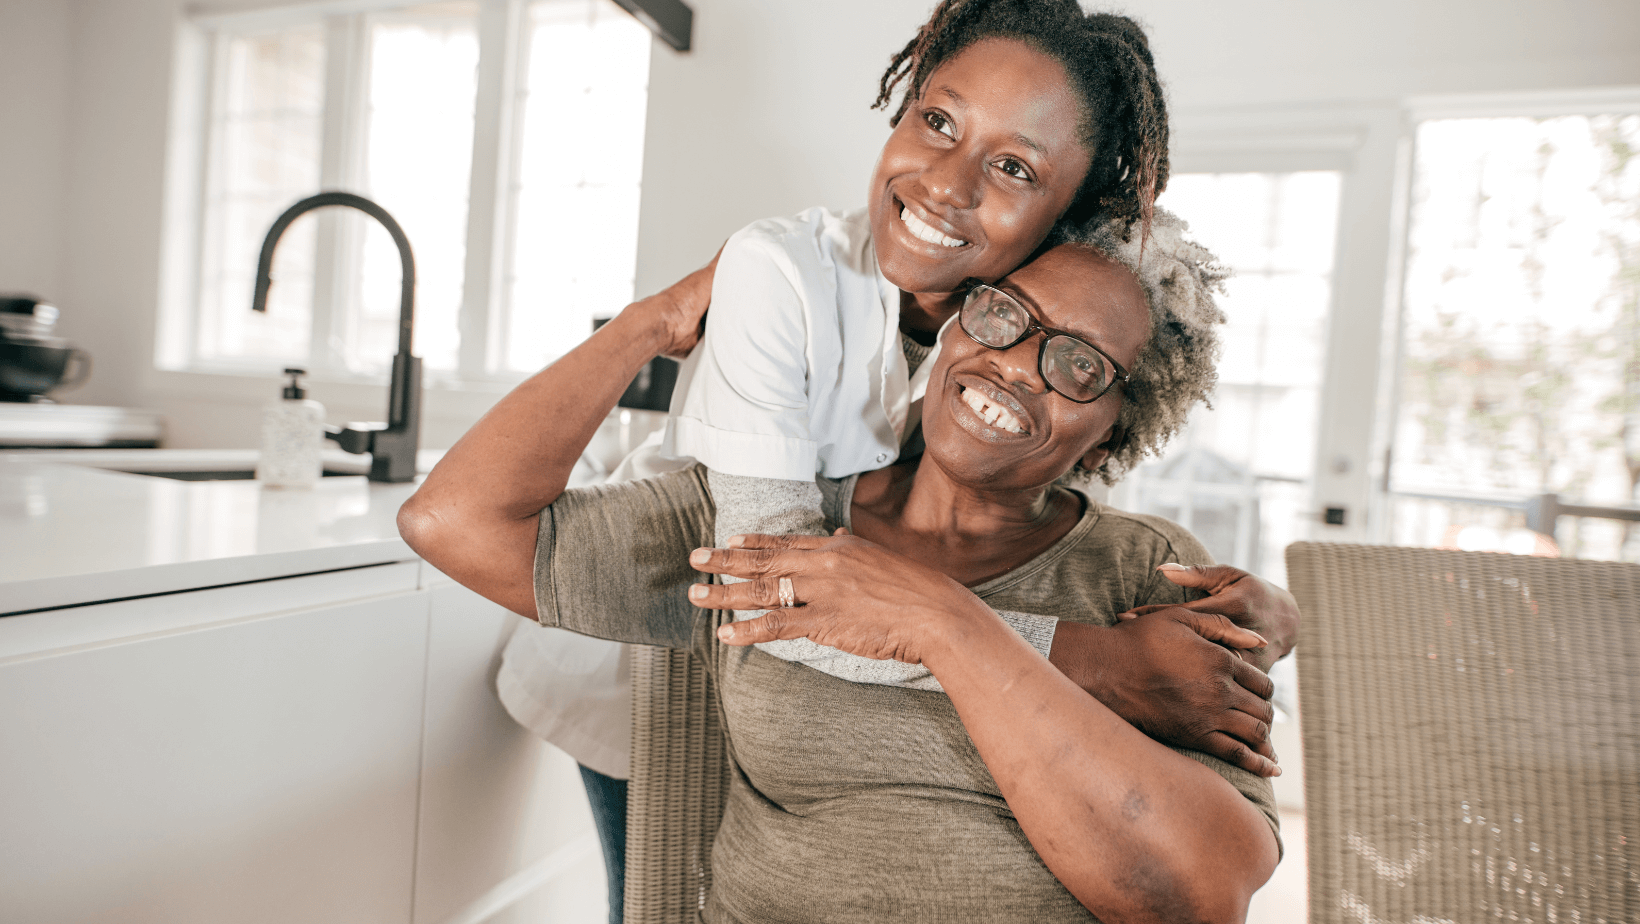 A younger Black woman hugs an older Black woman. They smile and look ahead. They are in a clean room that is modified to be safer for seniors.